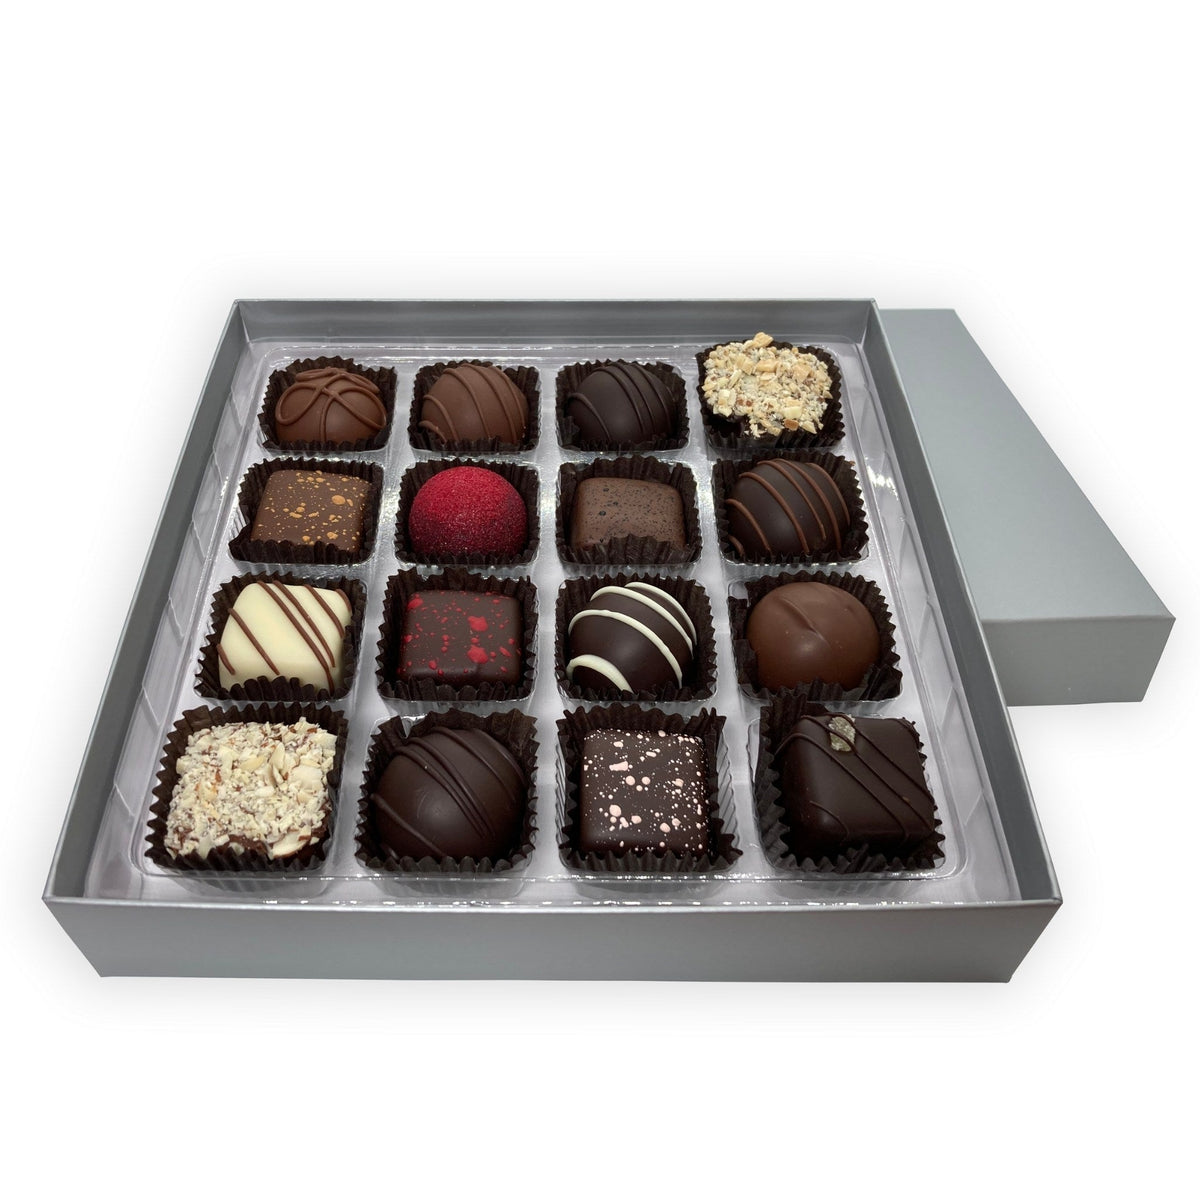 Dilettante Chocolates Premier Chocolate Collection Featuring Toffee, Caramels, and Truffles in Milk, Dark, and Light Chocolate Varieties